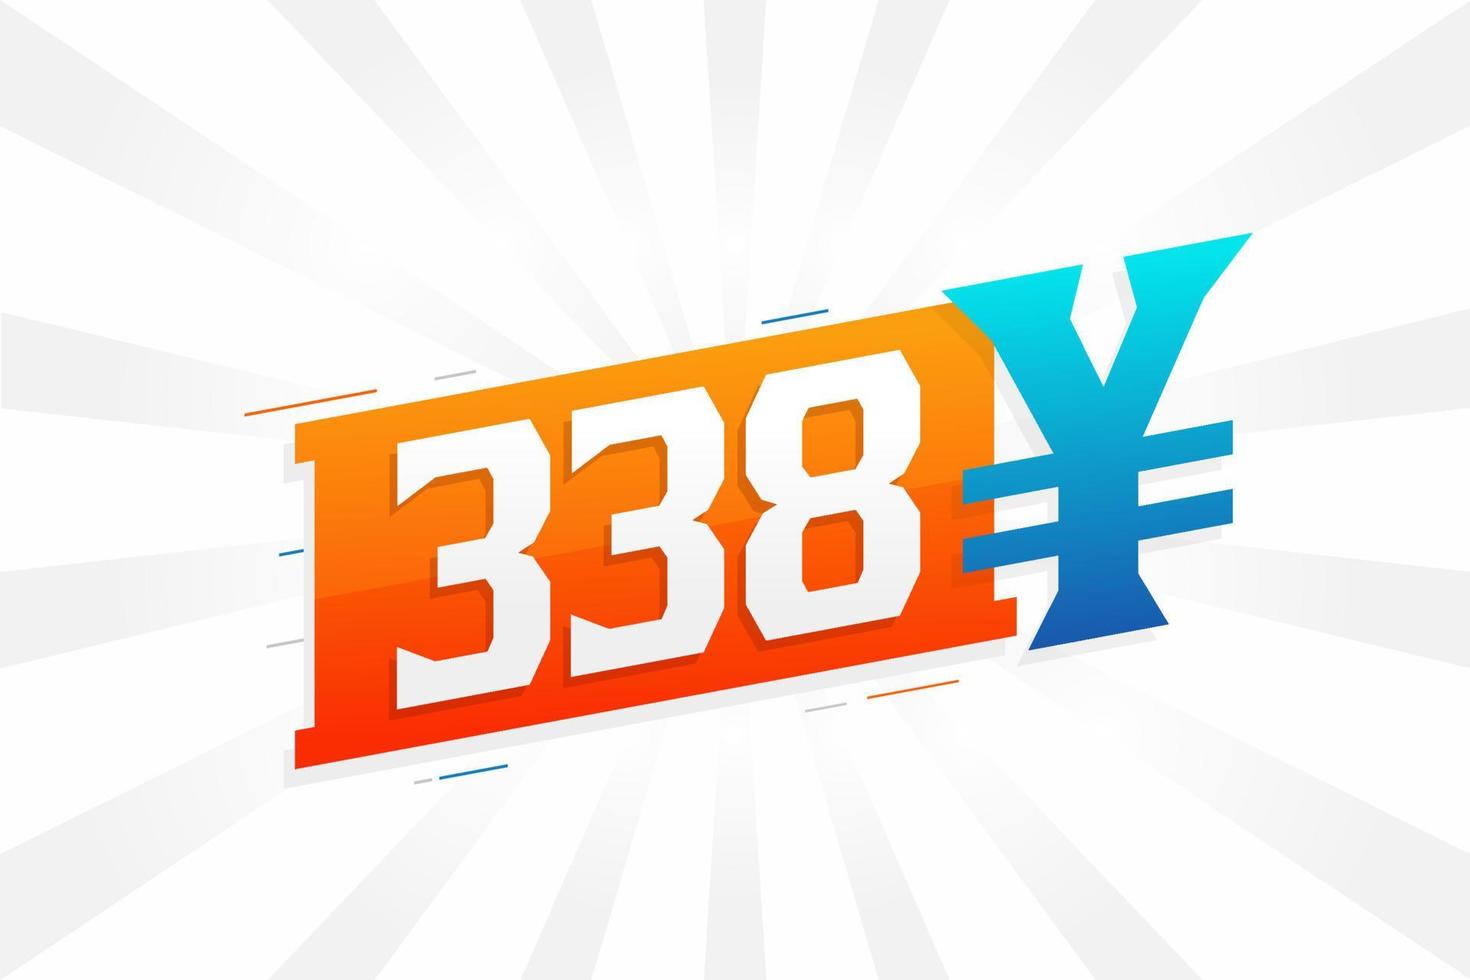 338 Yuan Chinese currency vector text symbol. 338 Yen Japanese currency Money stock vector